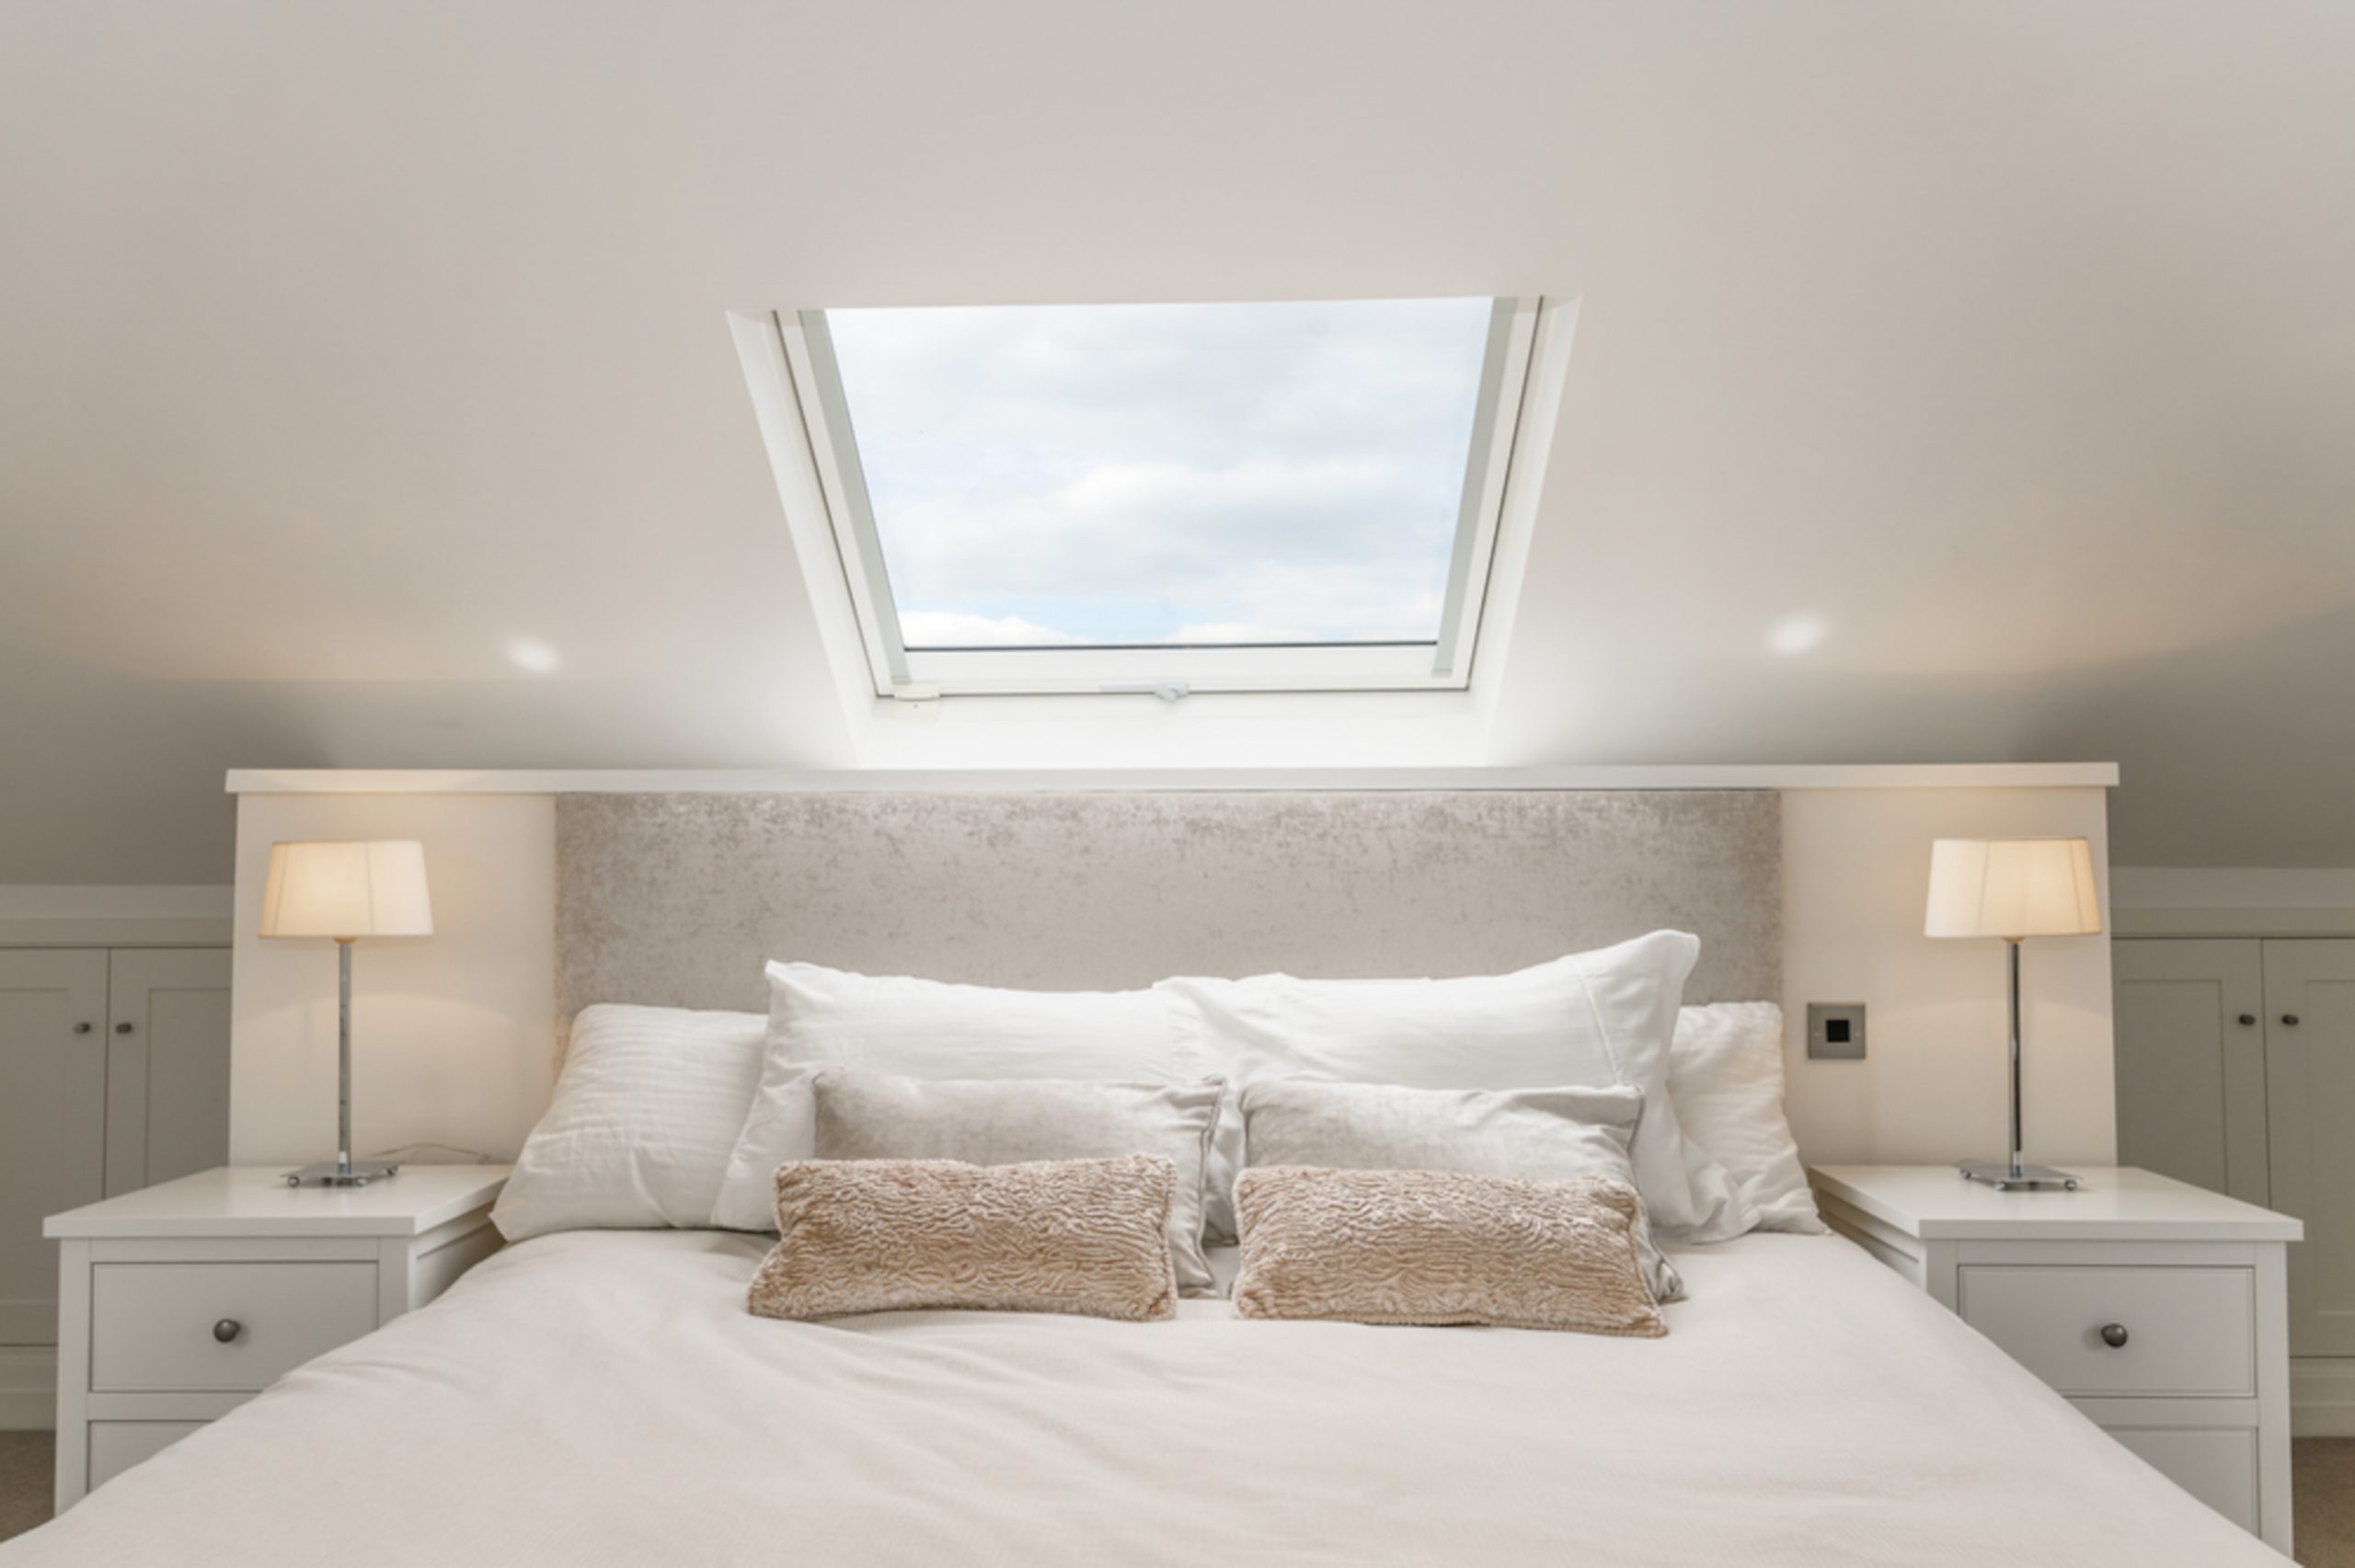 In the realm of architectural wonders, fixed skylights stand out as a timeless classic. These non-opening windows to the sky have graced New Zealand homes for decades, bringing in cascades of natural light and offering uninterrupted views of the azure heavens. Read More